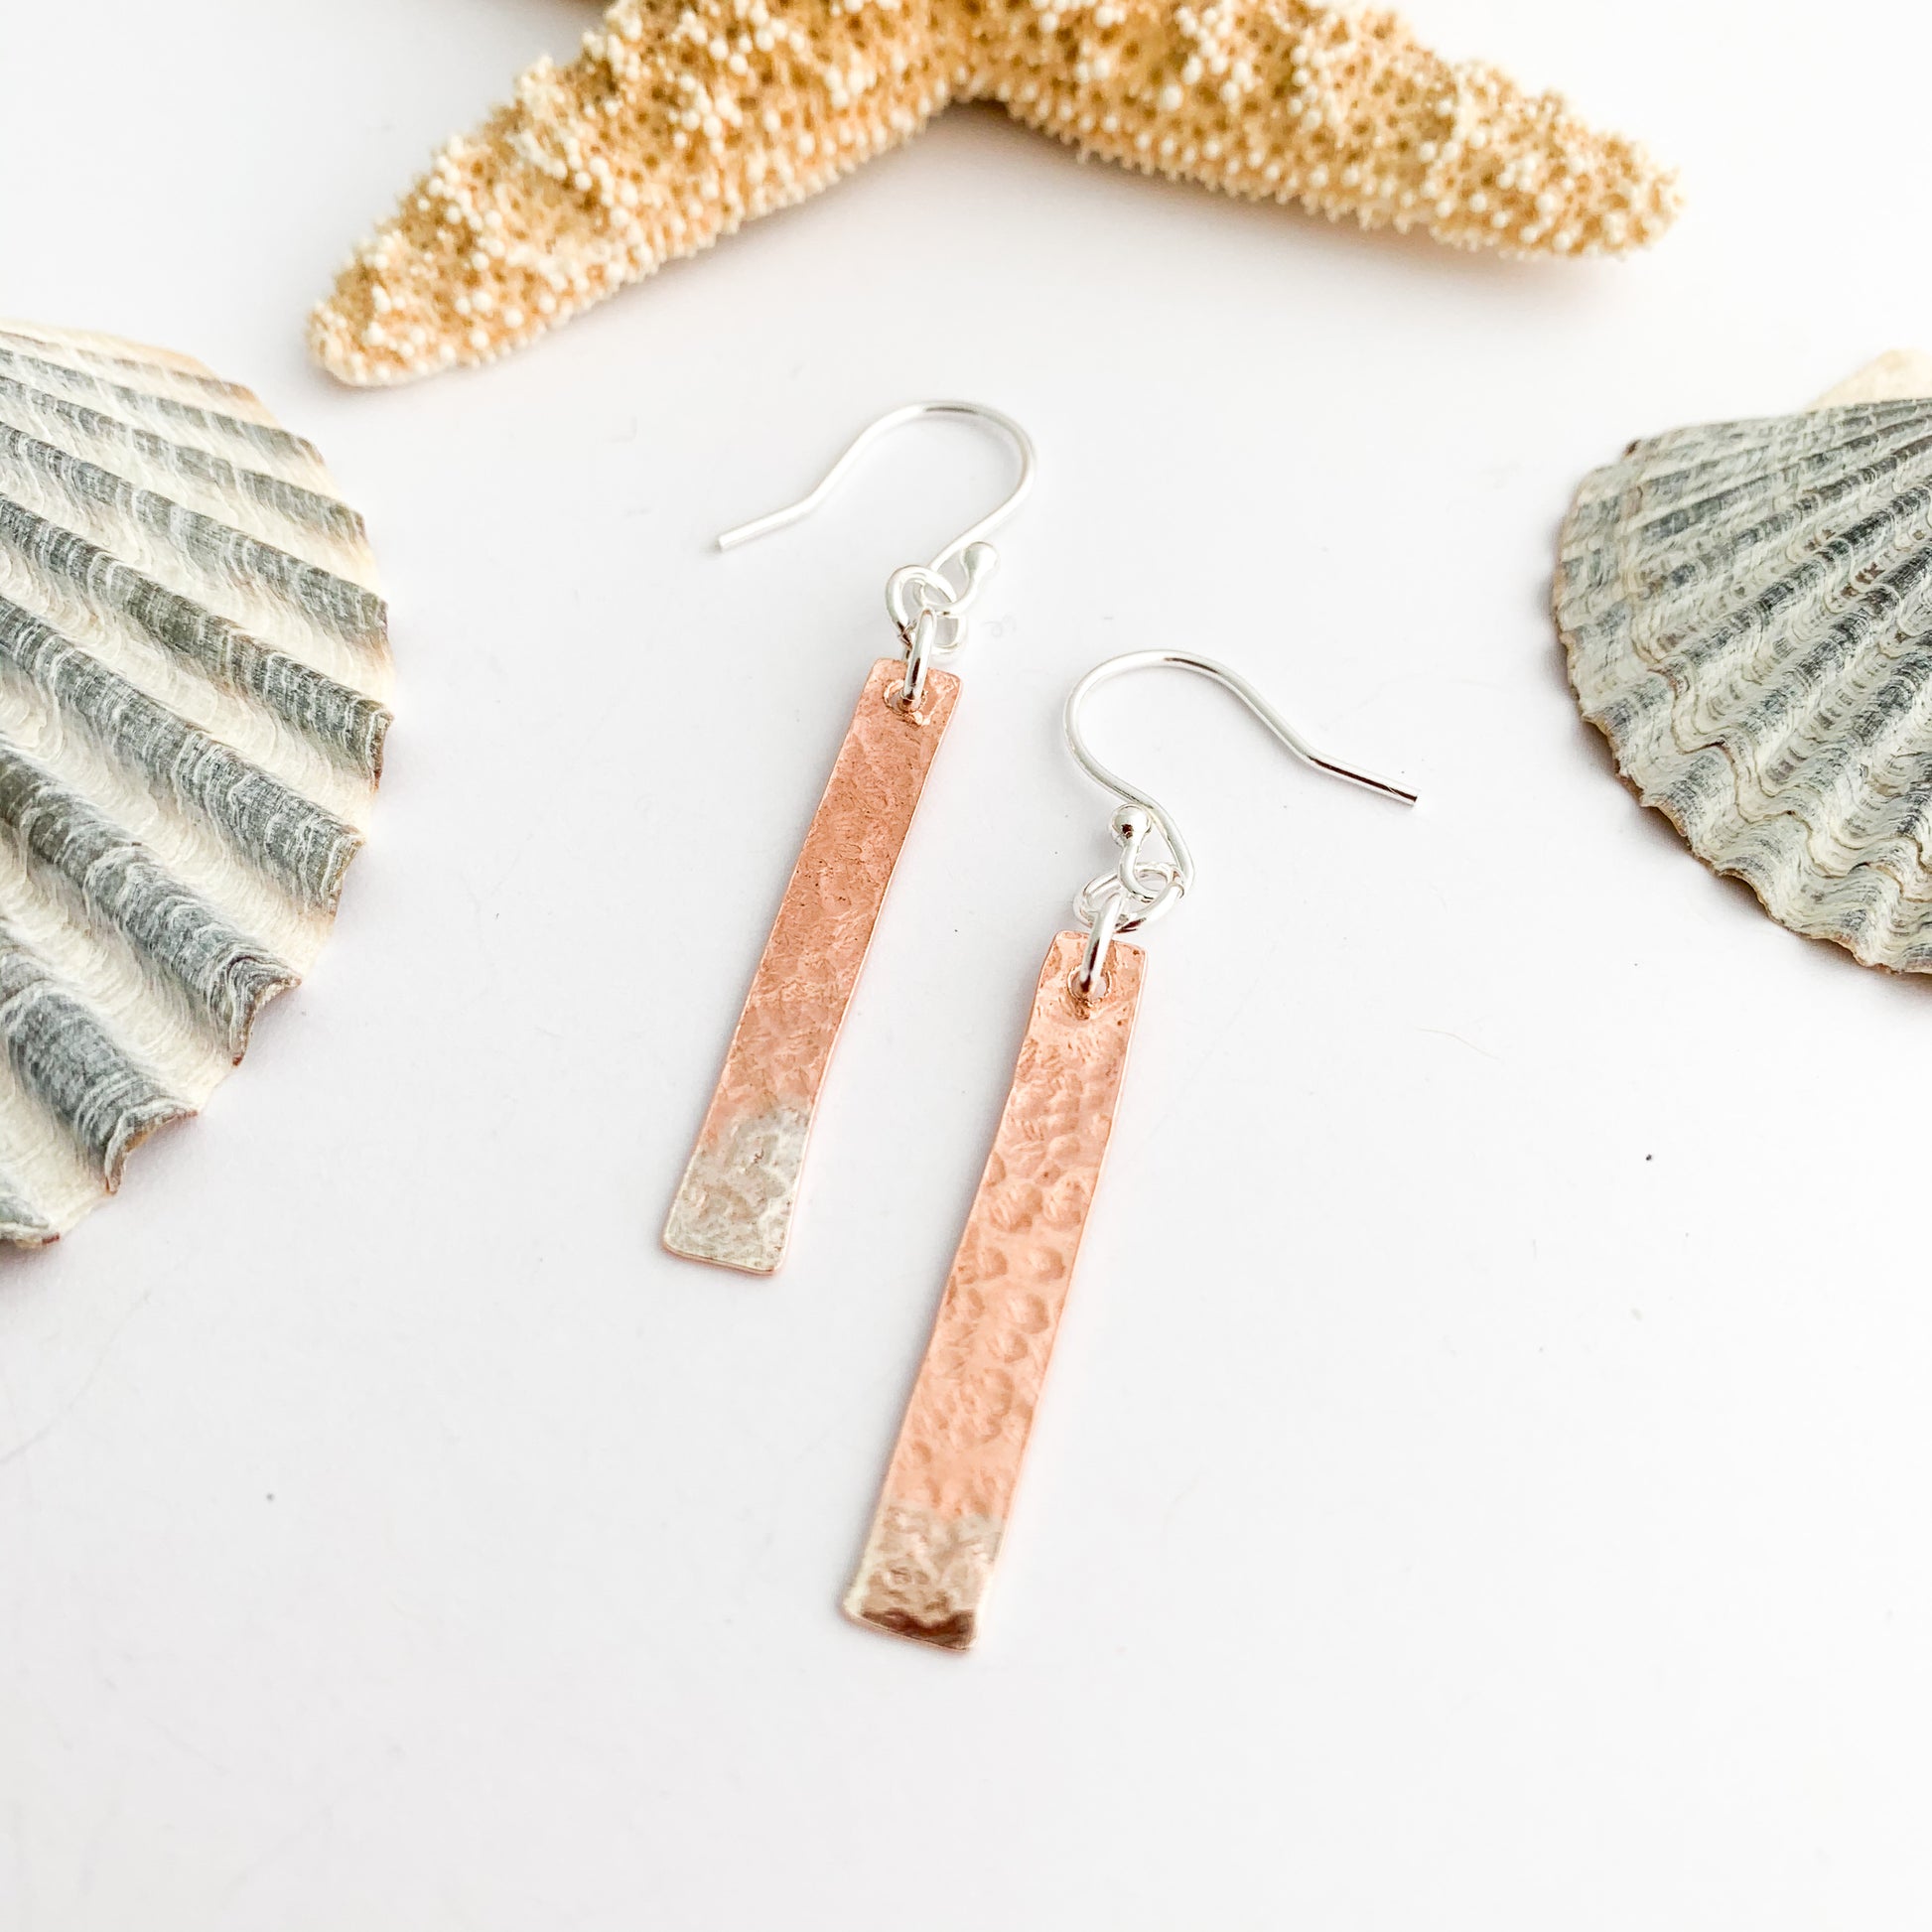 Dangly Copper and 925 Silver Bar Earrings